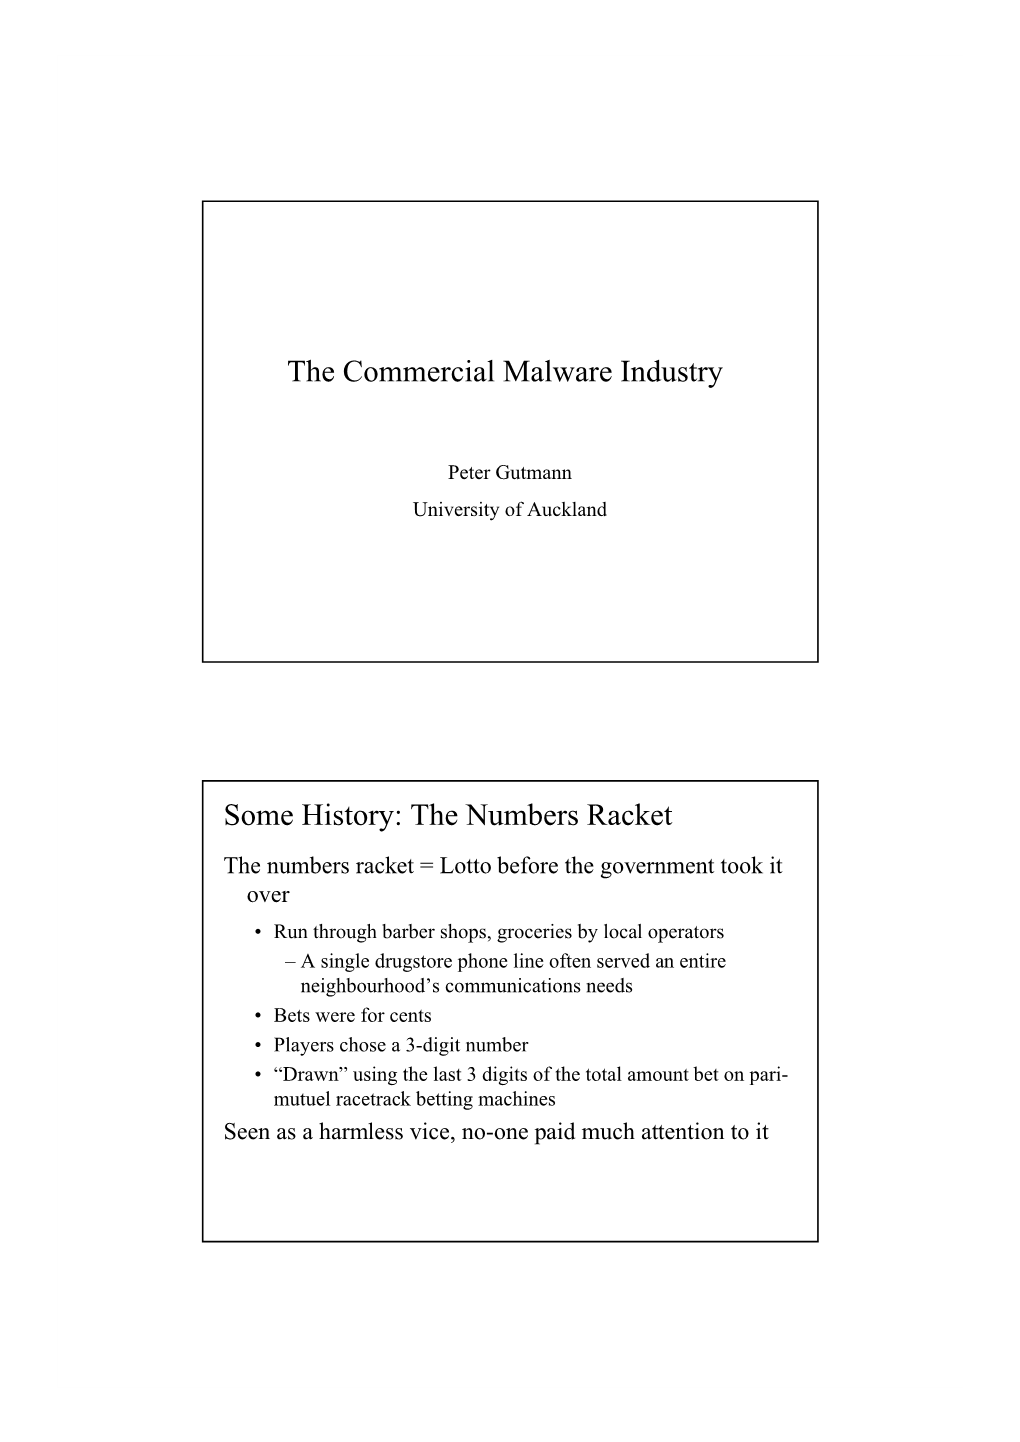 The Commercial Malware Industry Some History: the Numbers Racket